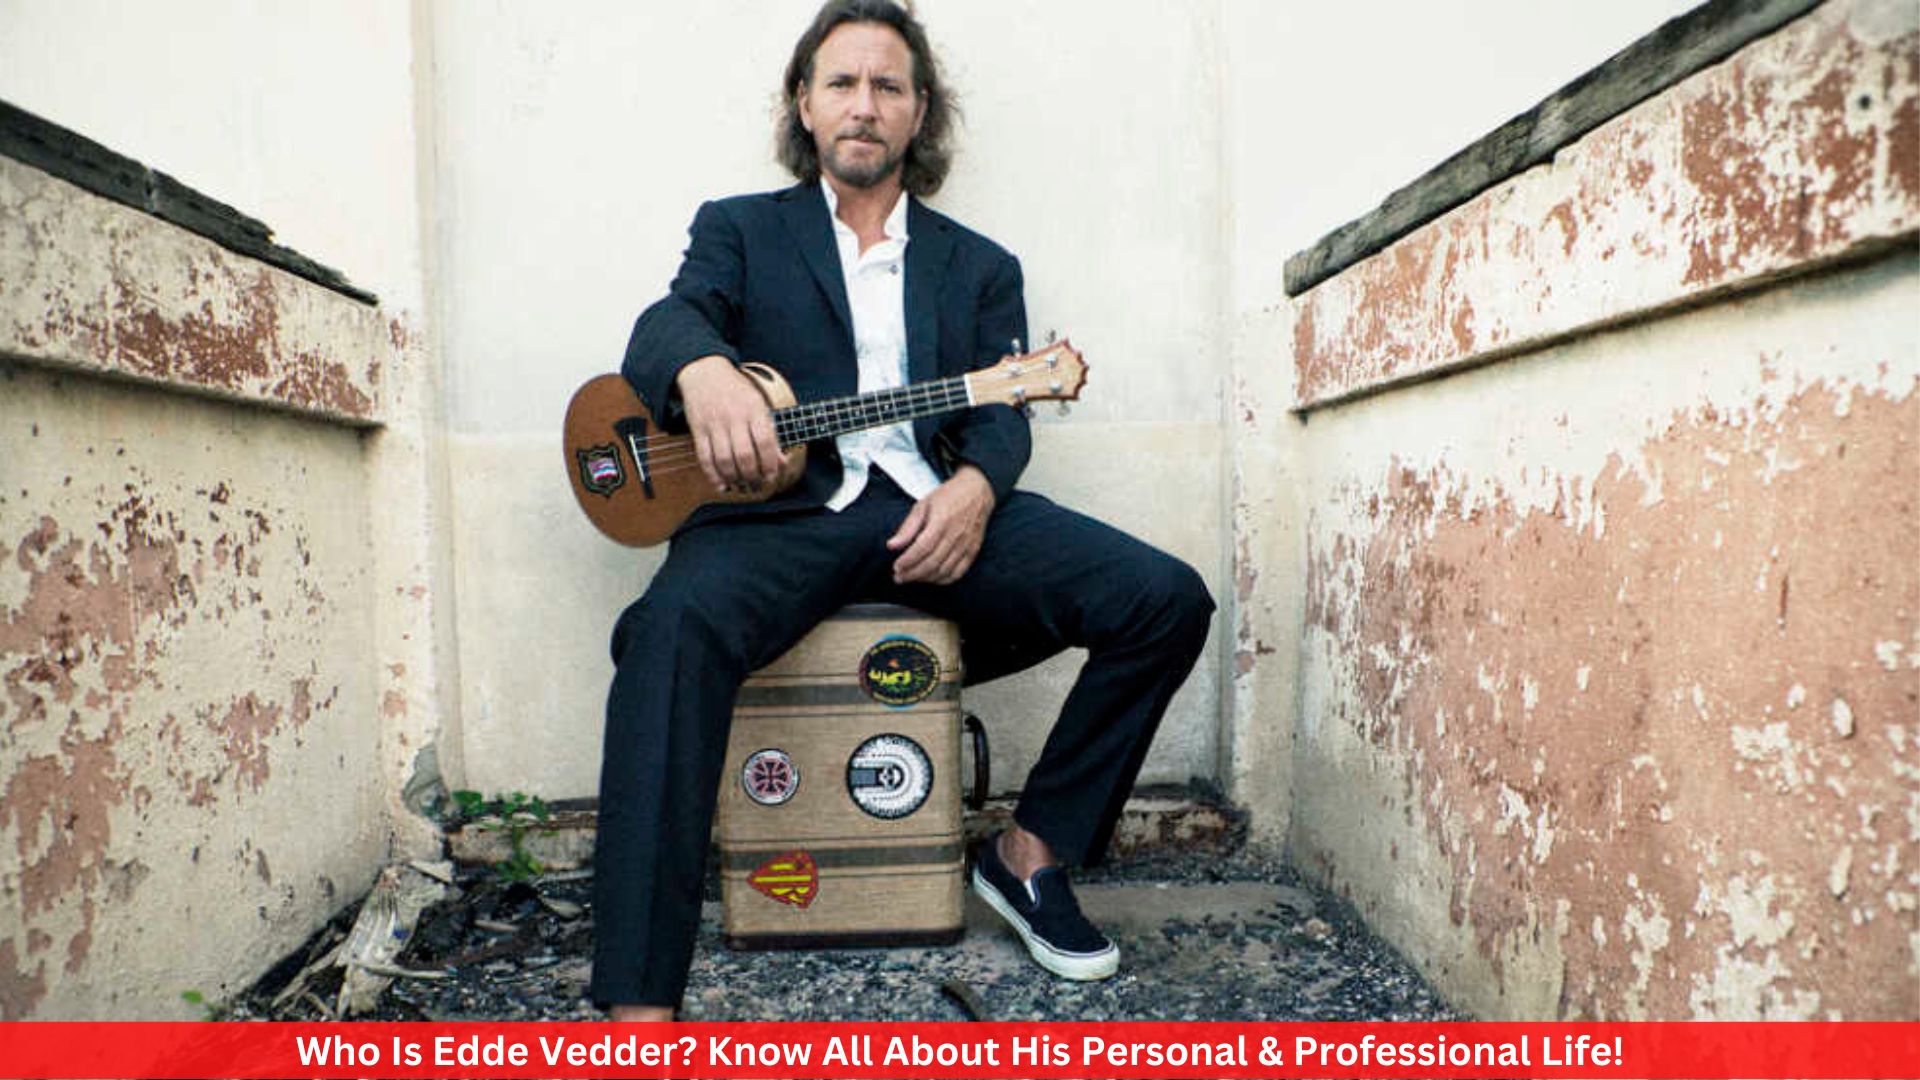 Who Is Edde Vedder? Know All About His Personal & Professional Life!